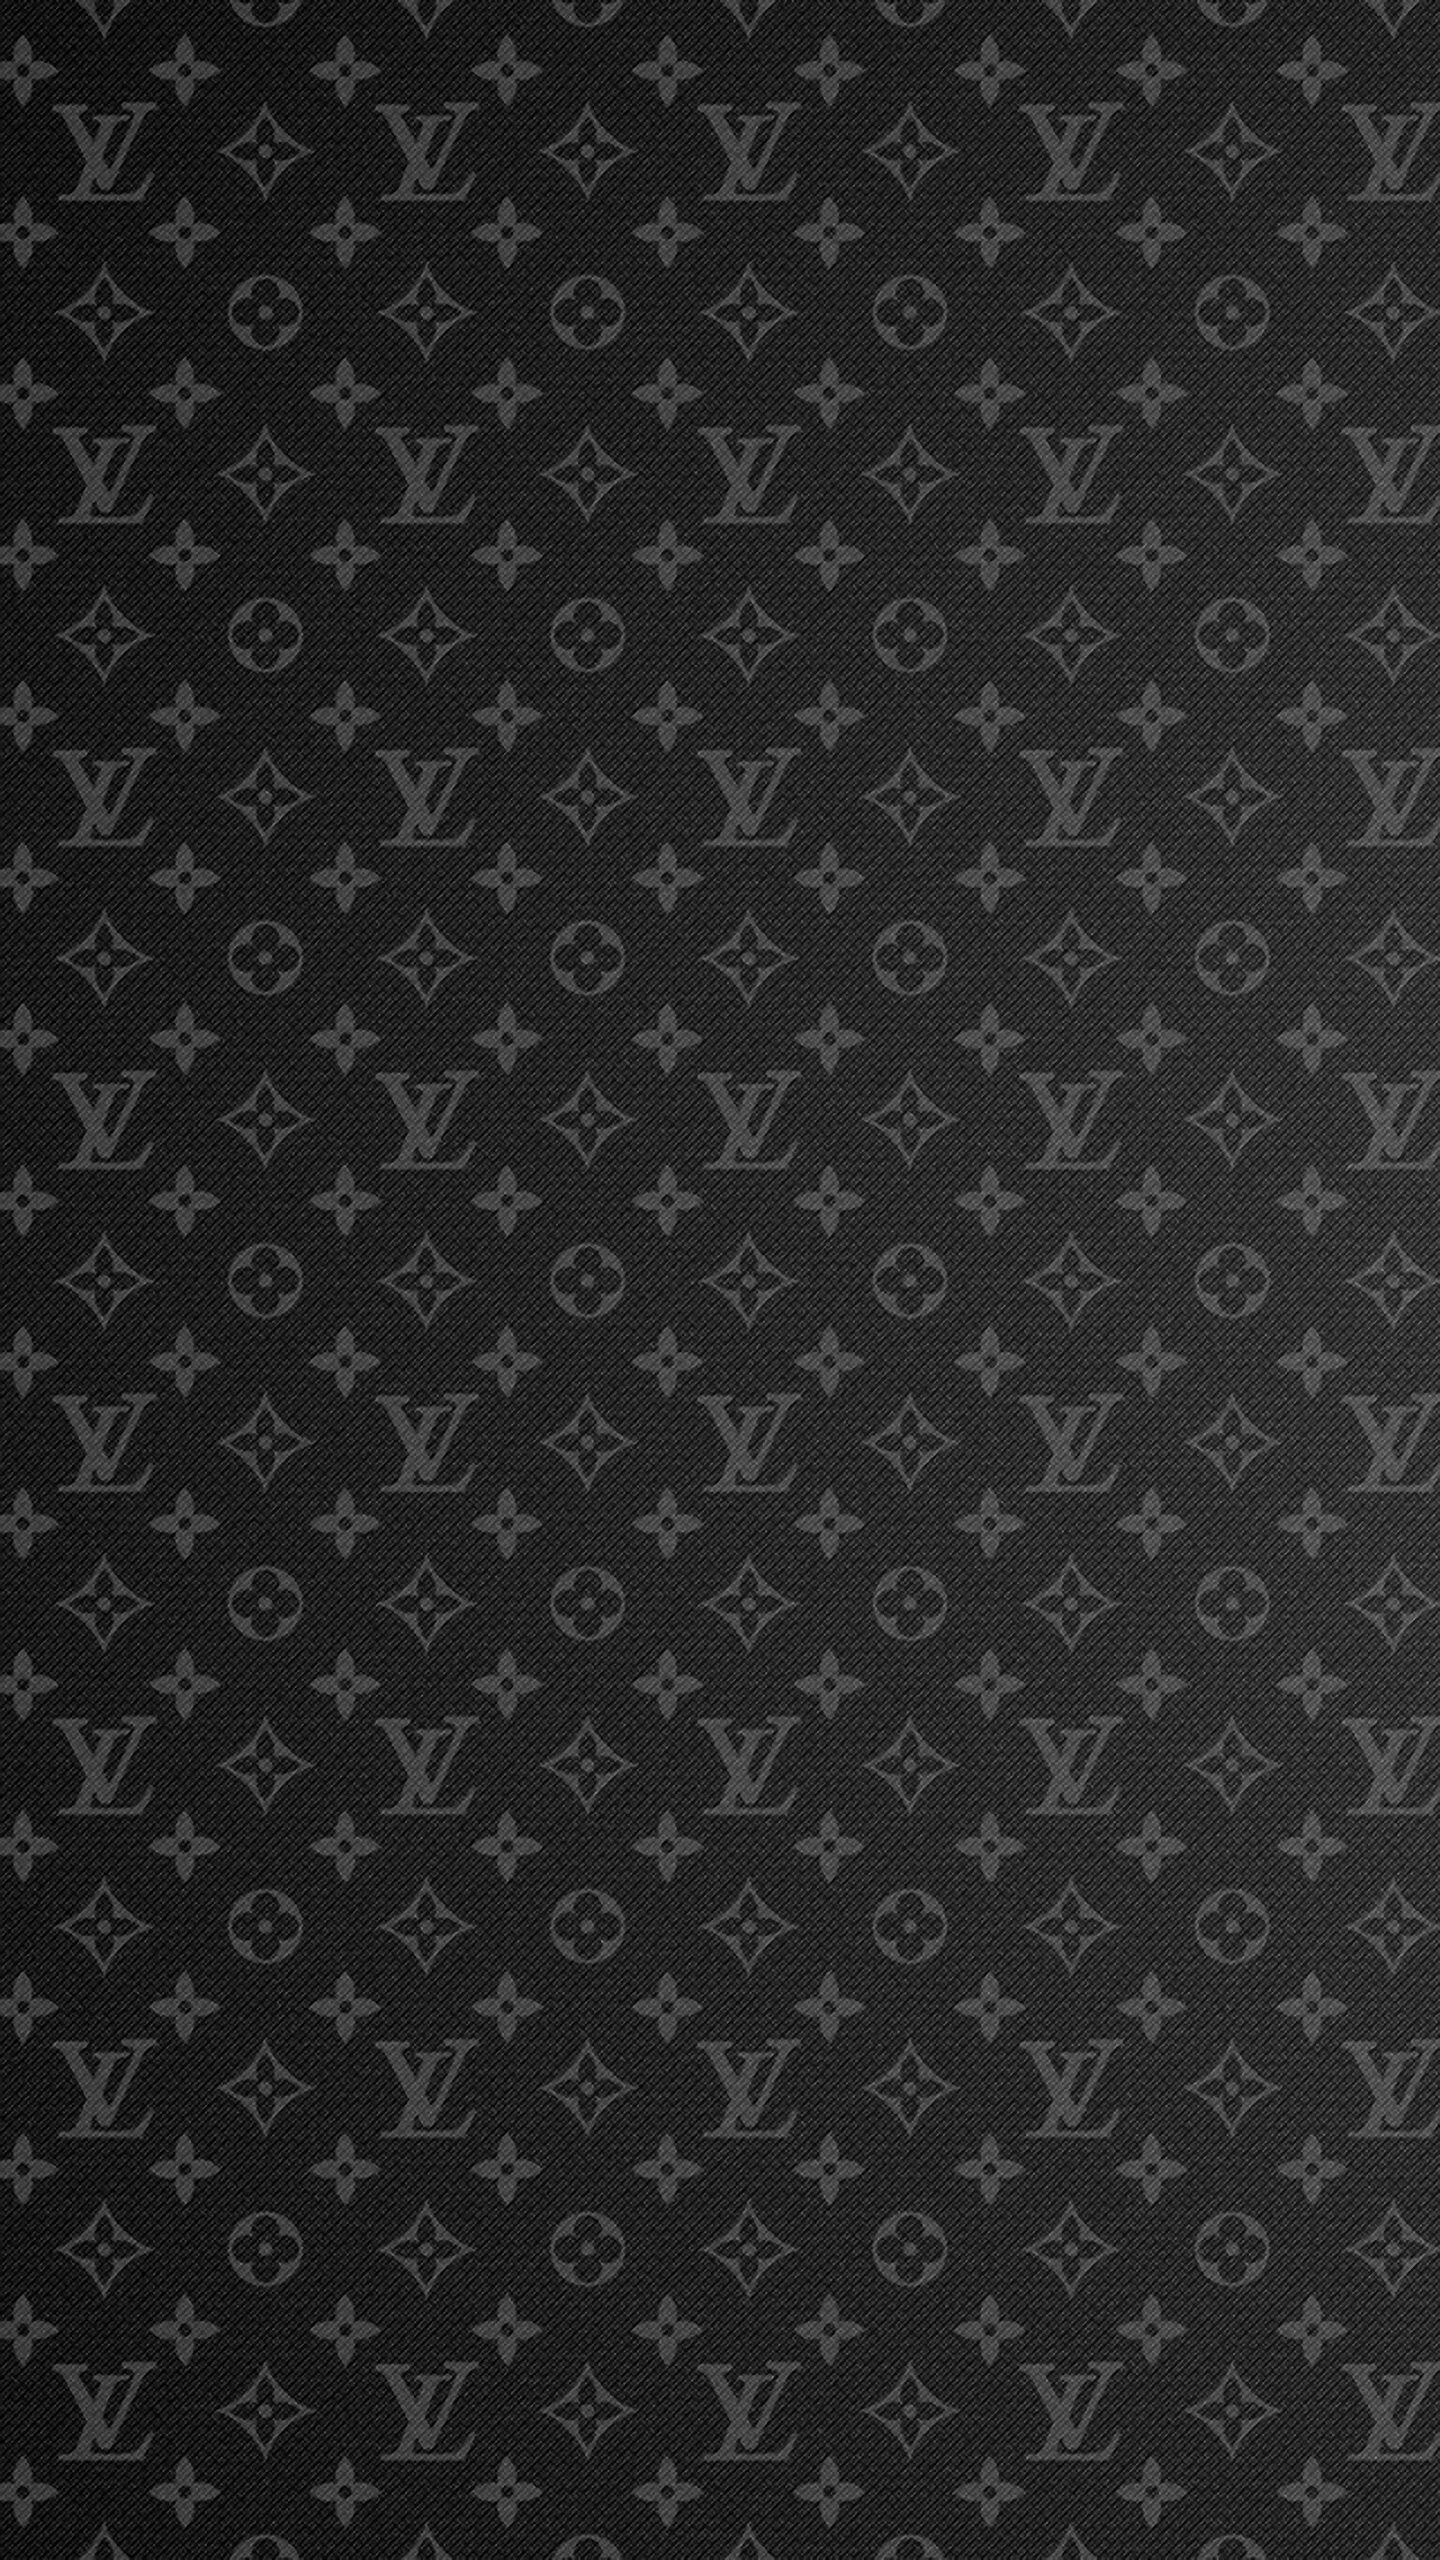 Louis Vuitton: The brand has a global presence around the world. 1440x2560 HD Background.